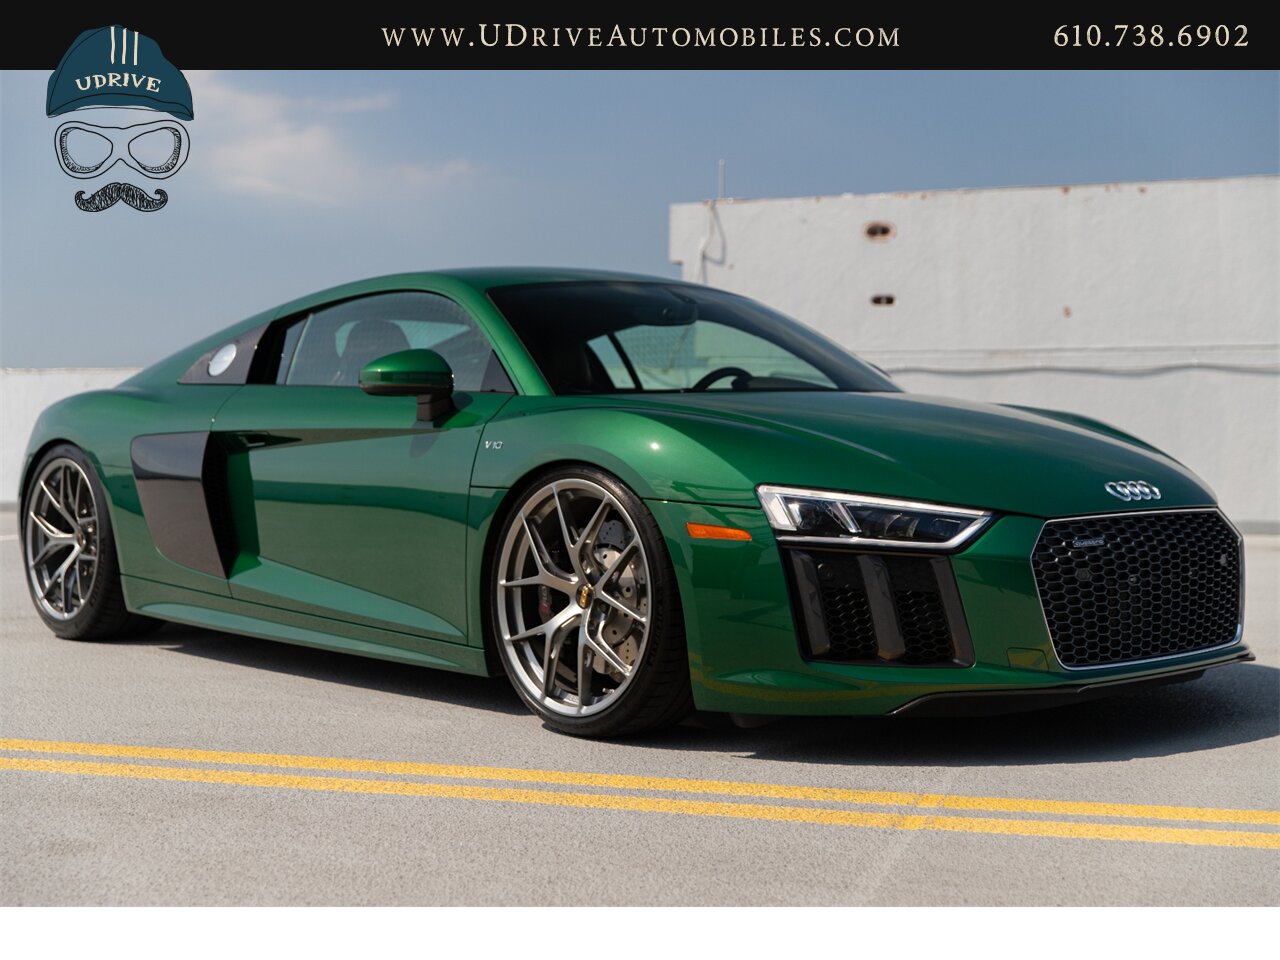 2017 Audi R8 Audi Exclusive Avocado Green Vermont Brown Leather  Diamond Stitching V10 Carbon Fiber - Photo 17 - West Chester, PA 19382